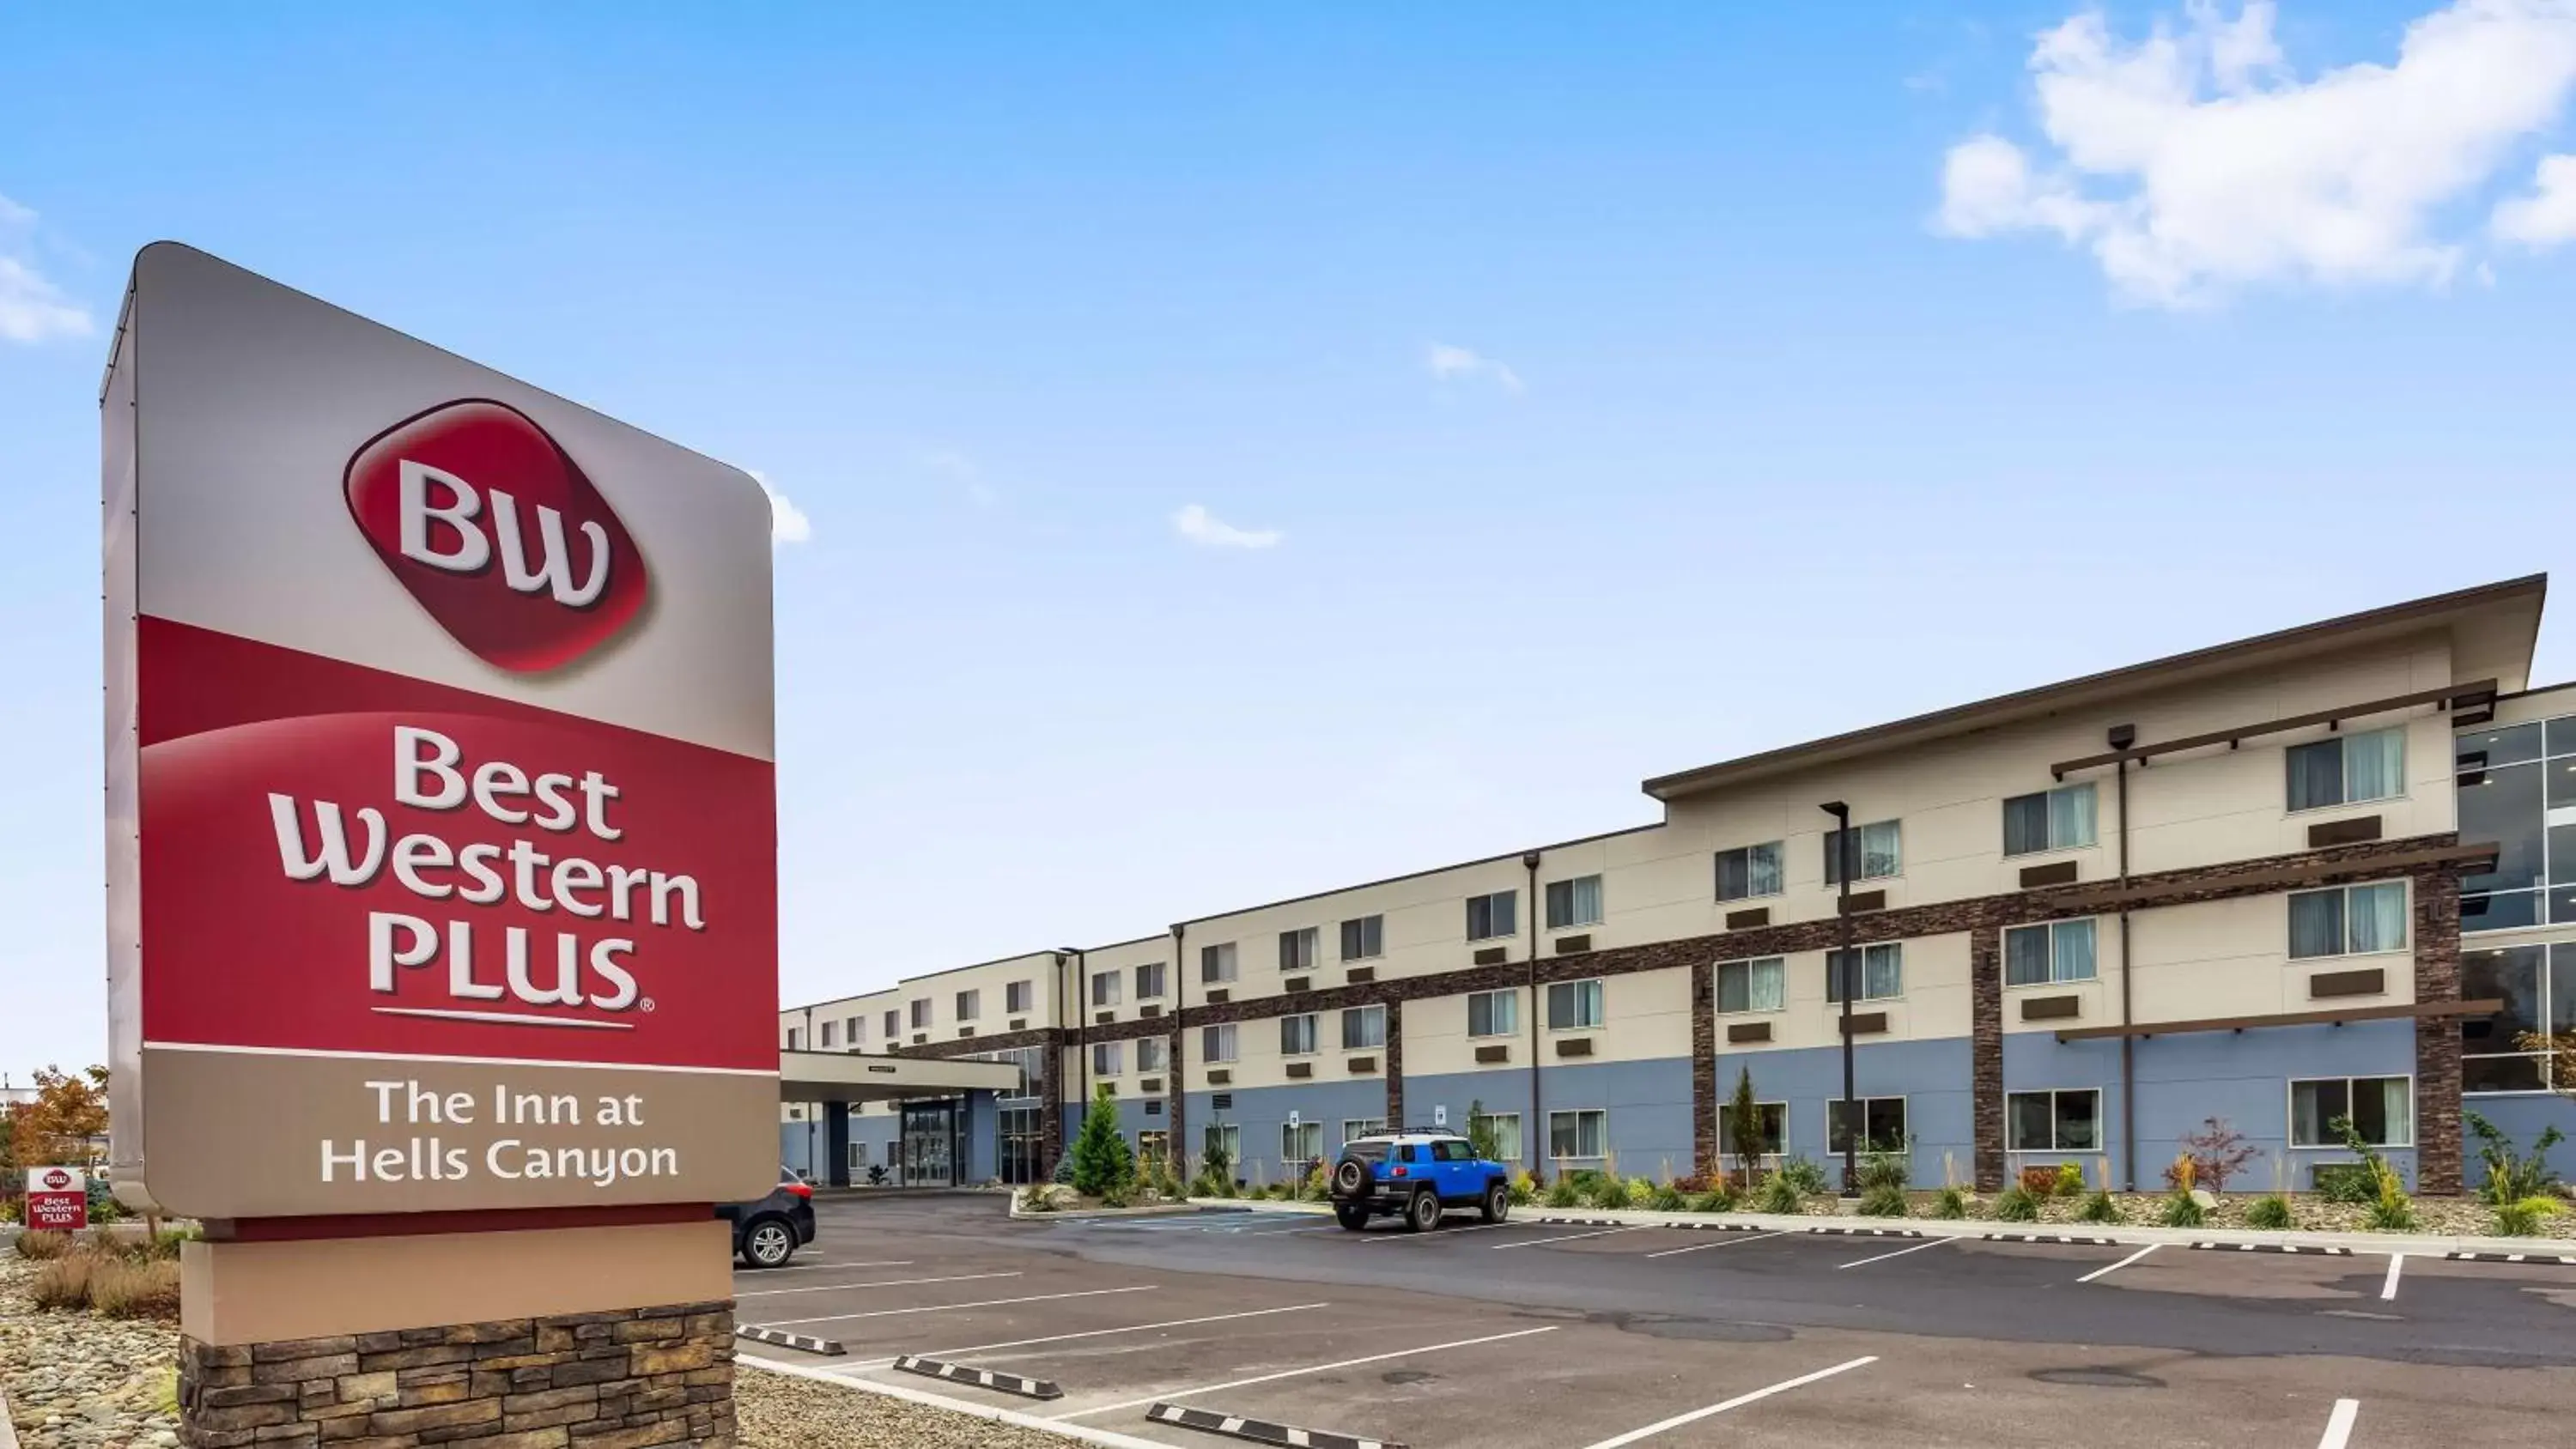 Property building in Best Western Plus The Inn at Hells Canyon